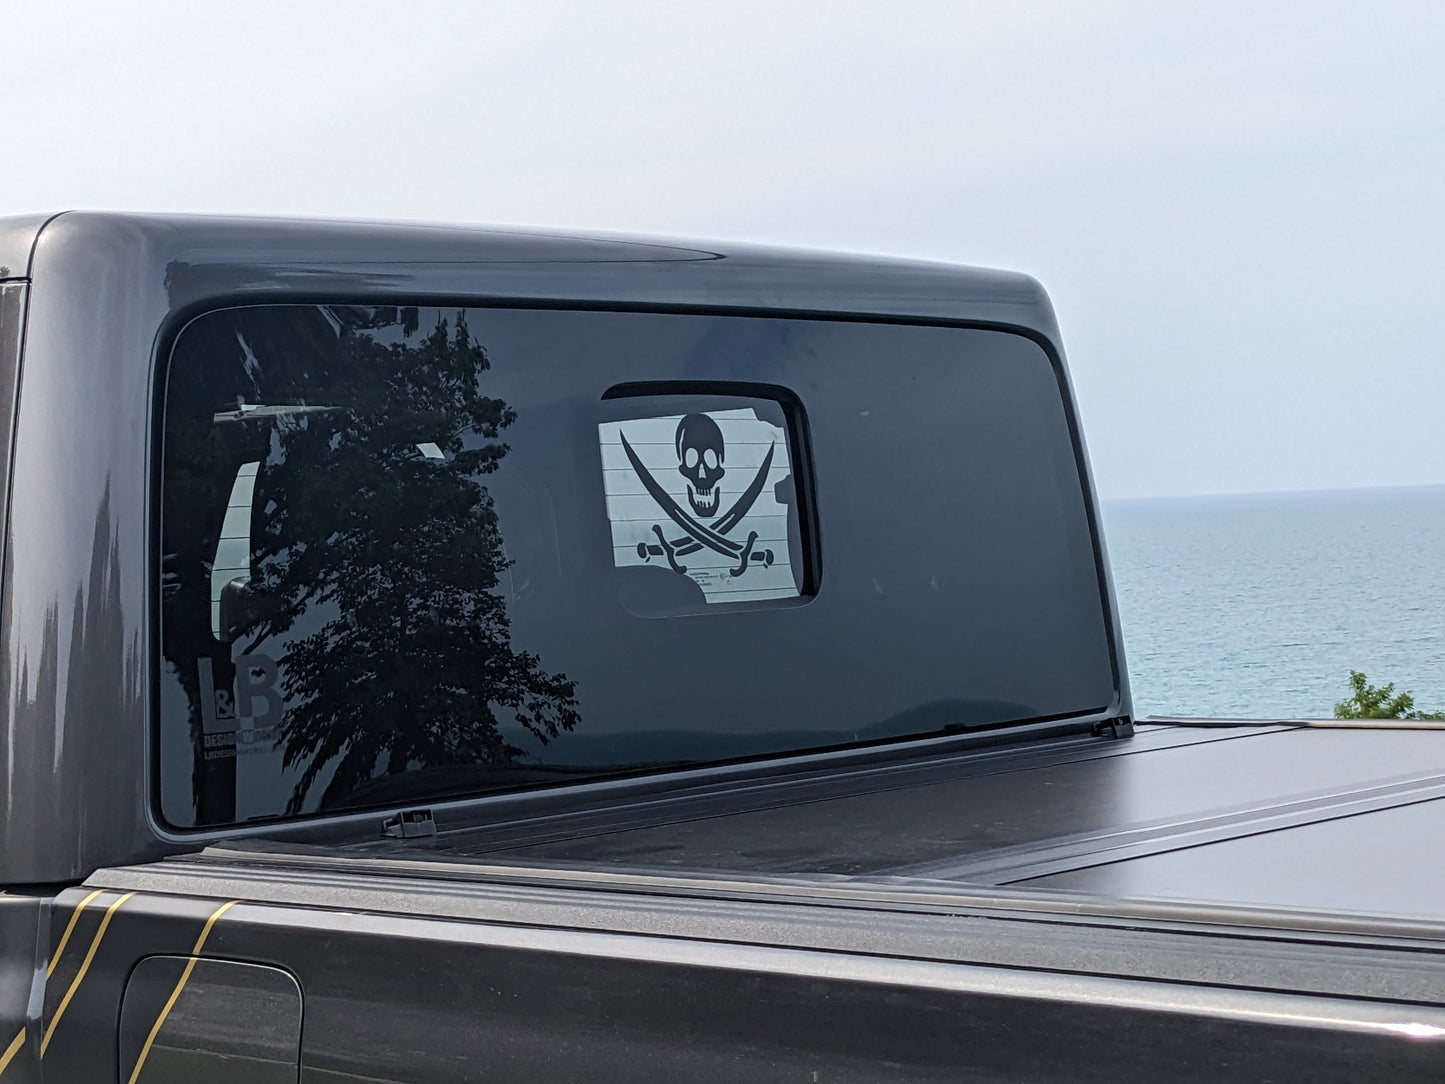 Jolly Roger Pirate Flag Skull and Swords Cab Window Decal